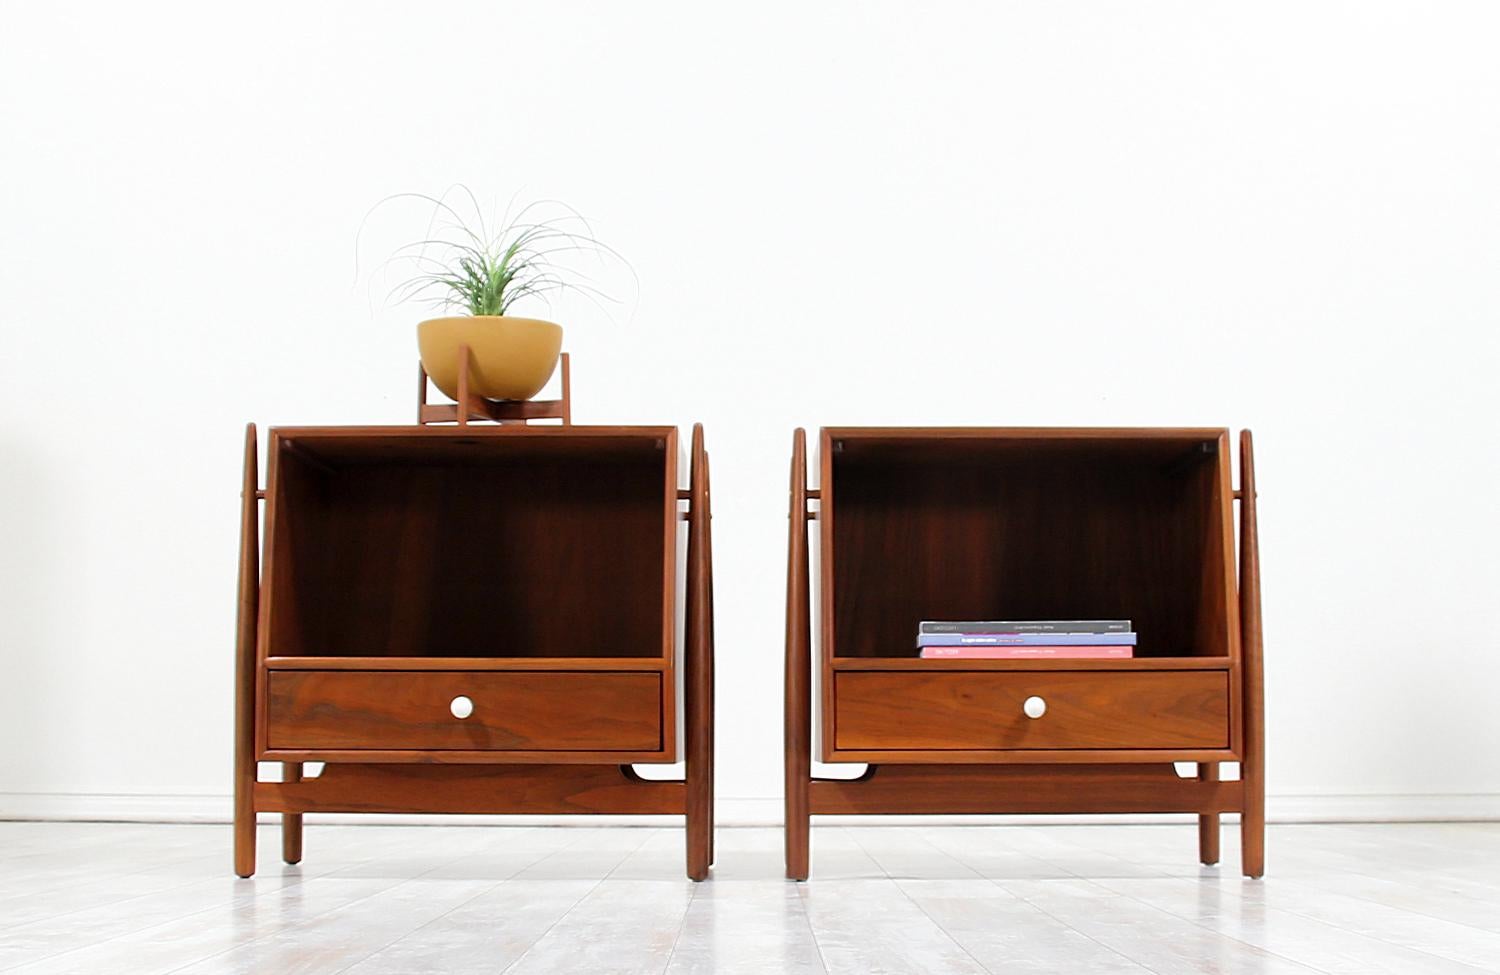 A pair of Mid-Century Modern nightstands designed by Kipp Stewart & Stewart MacDougall for Drexel’s ‘Declaration’ line in the United States, circa 1960s. Drexel’s ‘Declaration’ iconic collection shows Minimalist expressions and a straightforward